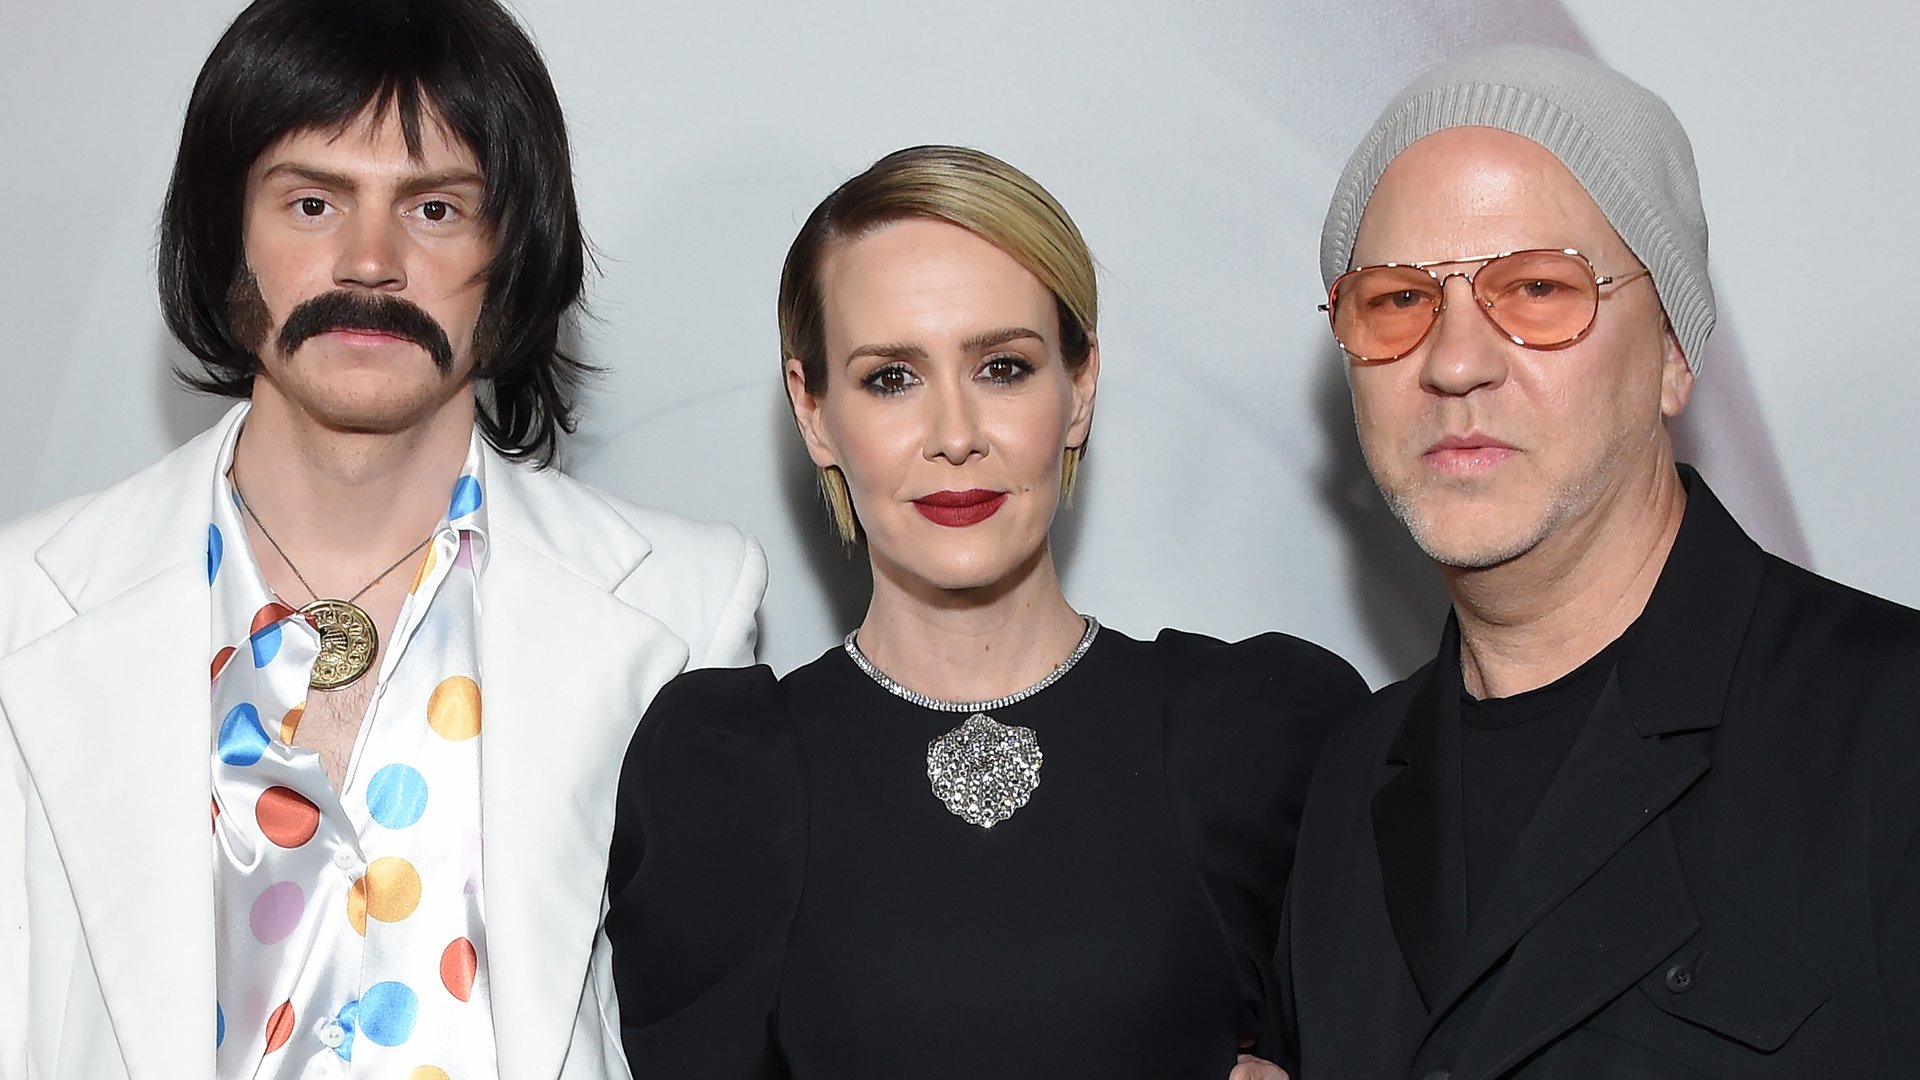 Evan Peters, Sarah Paulson, and Ryan Murphy arrive for the Red Carpet event celebrating 100 episodes of FX's "American Horror Story" at the Hollywood Forever Cemetary in Los Angeles on October 26, 2019.